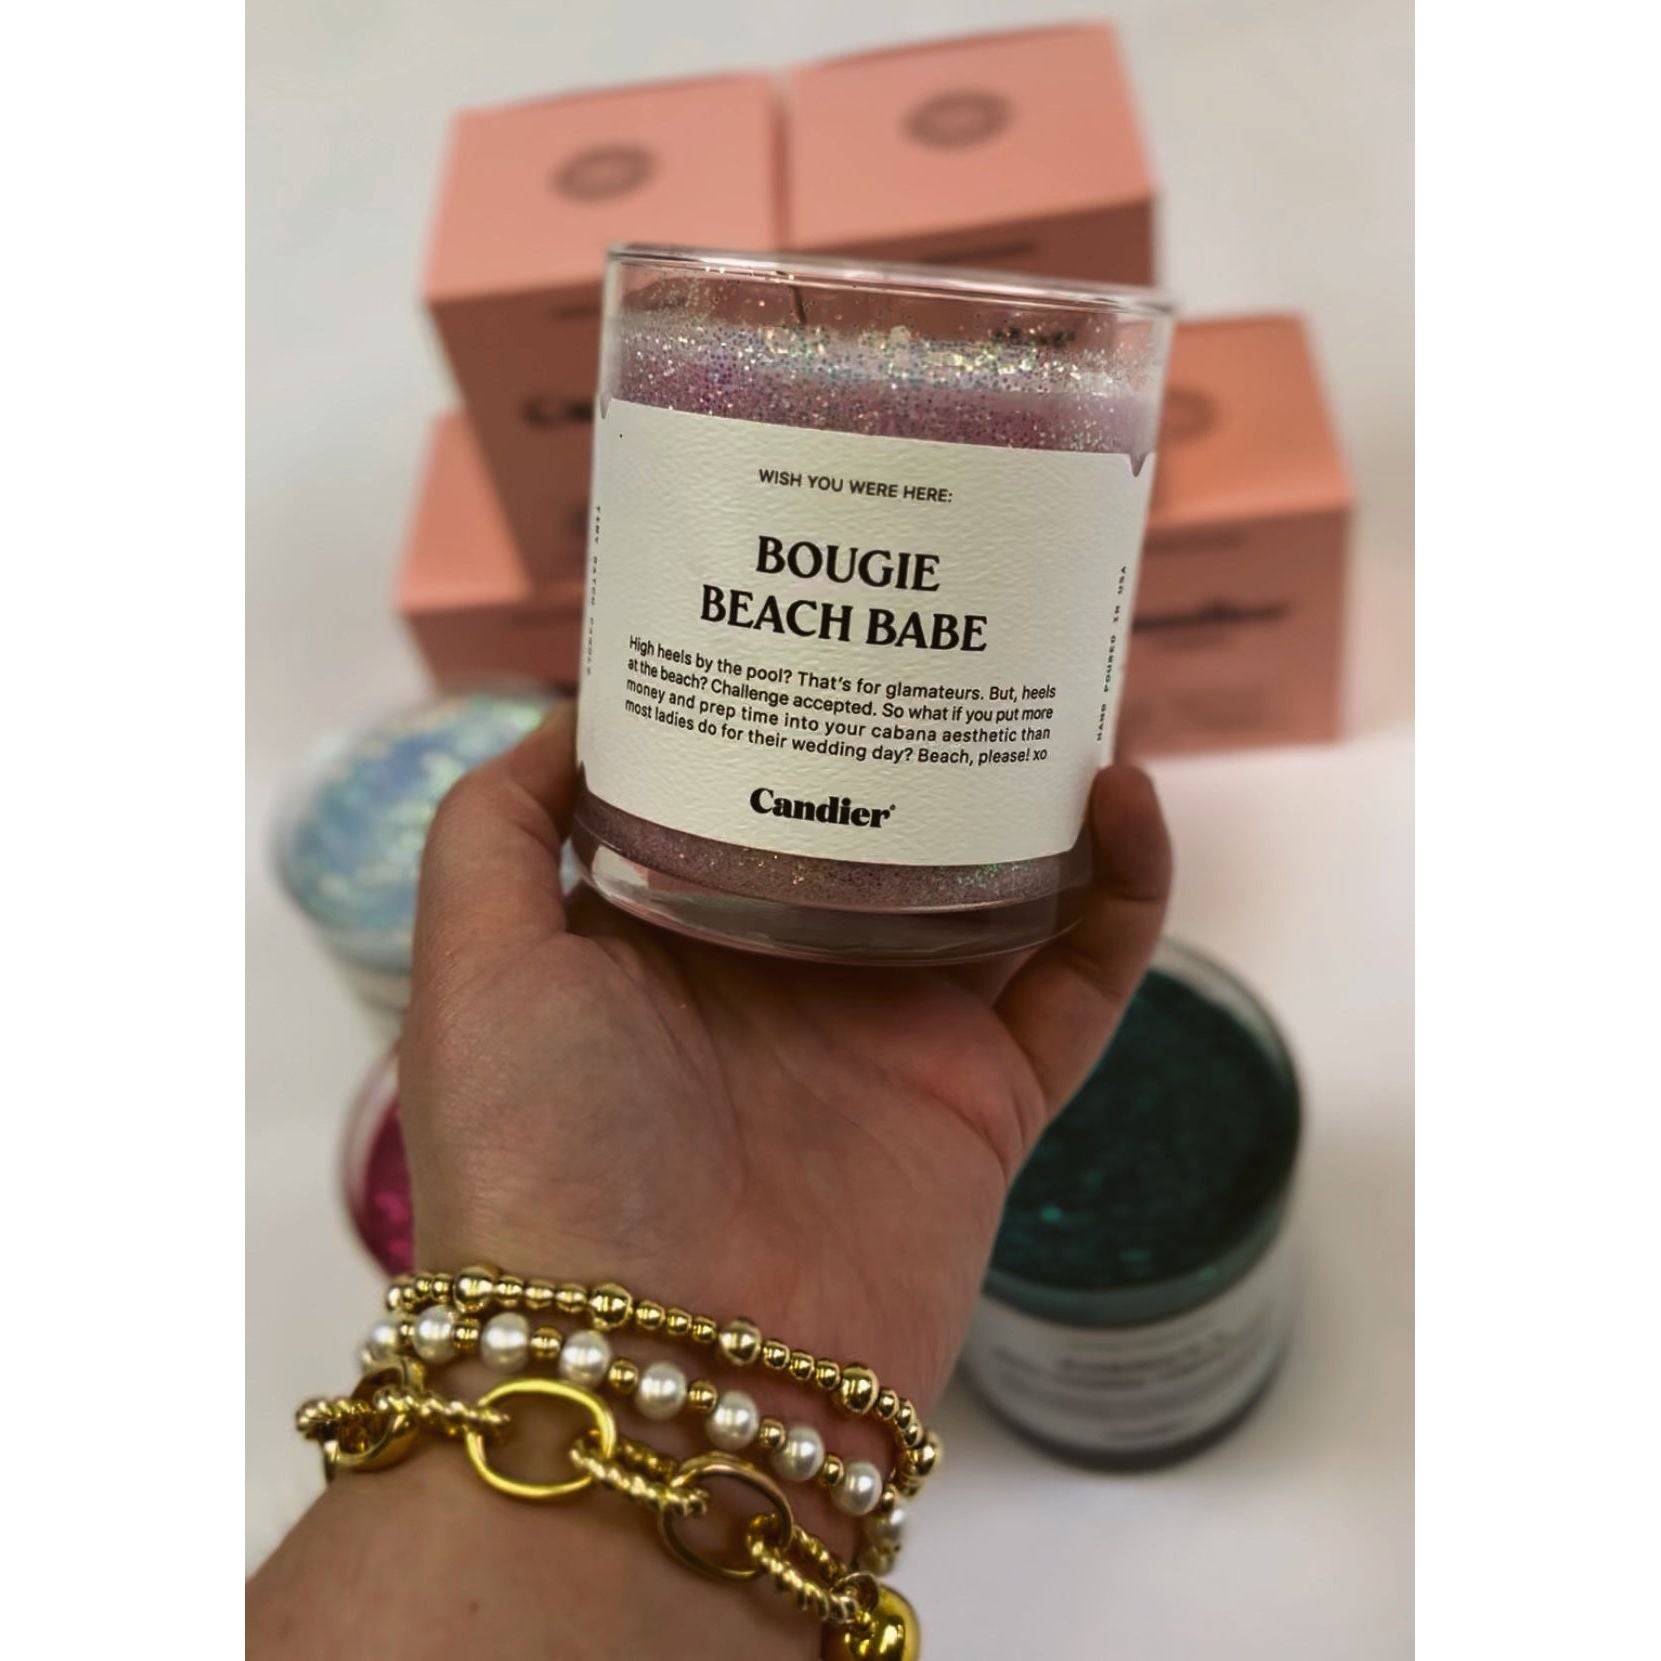 Bougie Beach Babe Candle